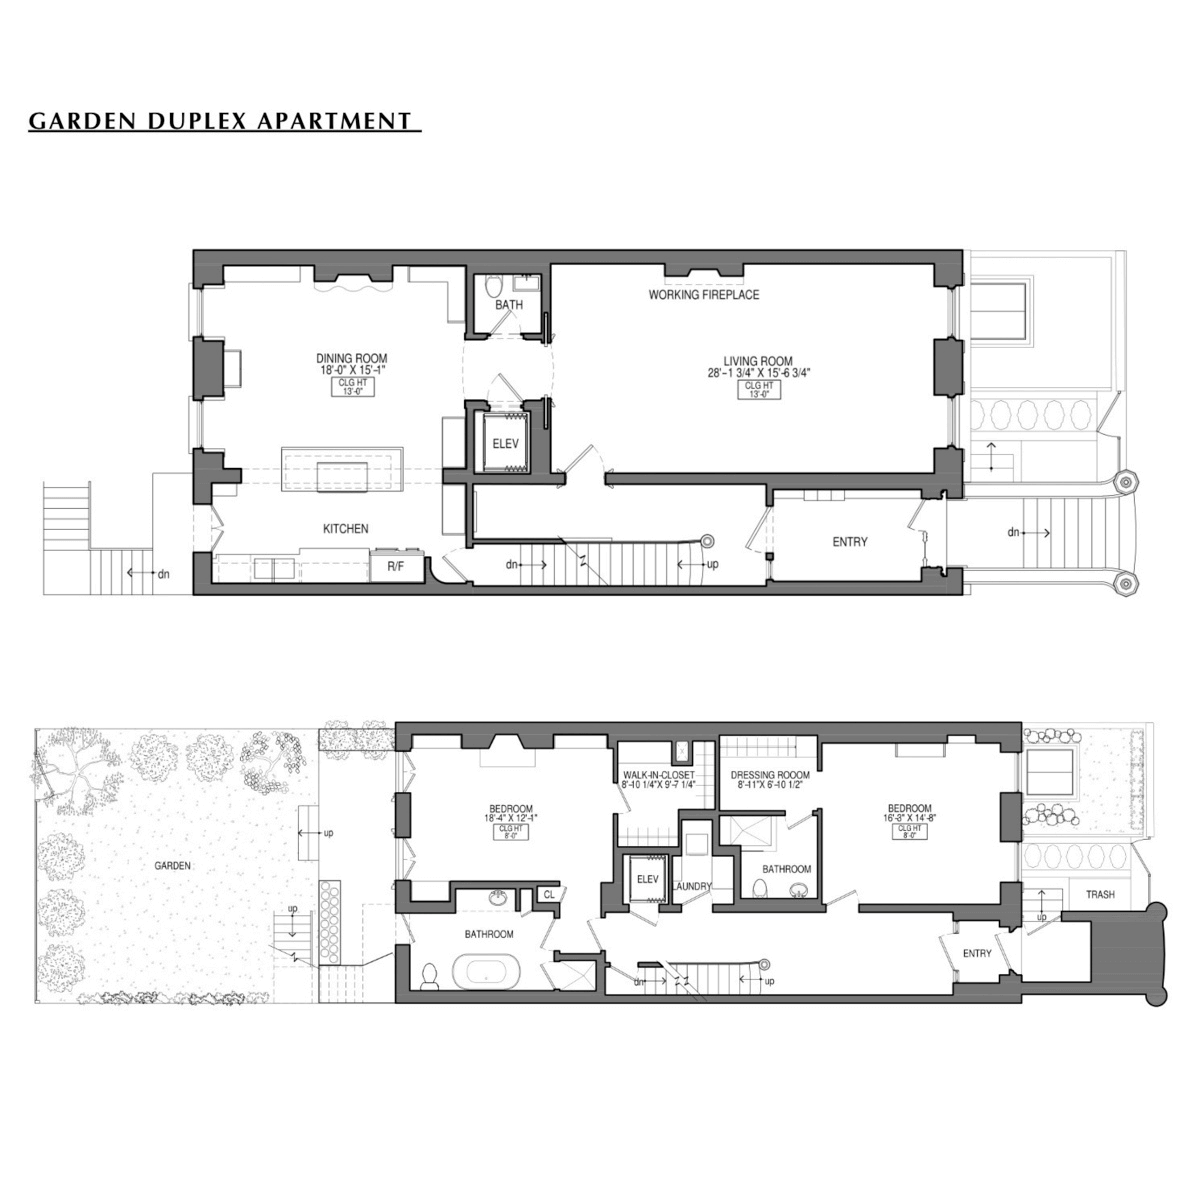 floorplan for the lower duplex with parlor level living room and garden level bedrooms